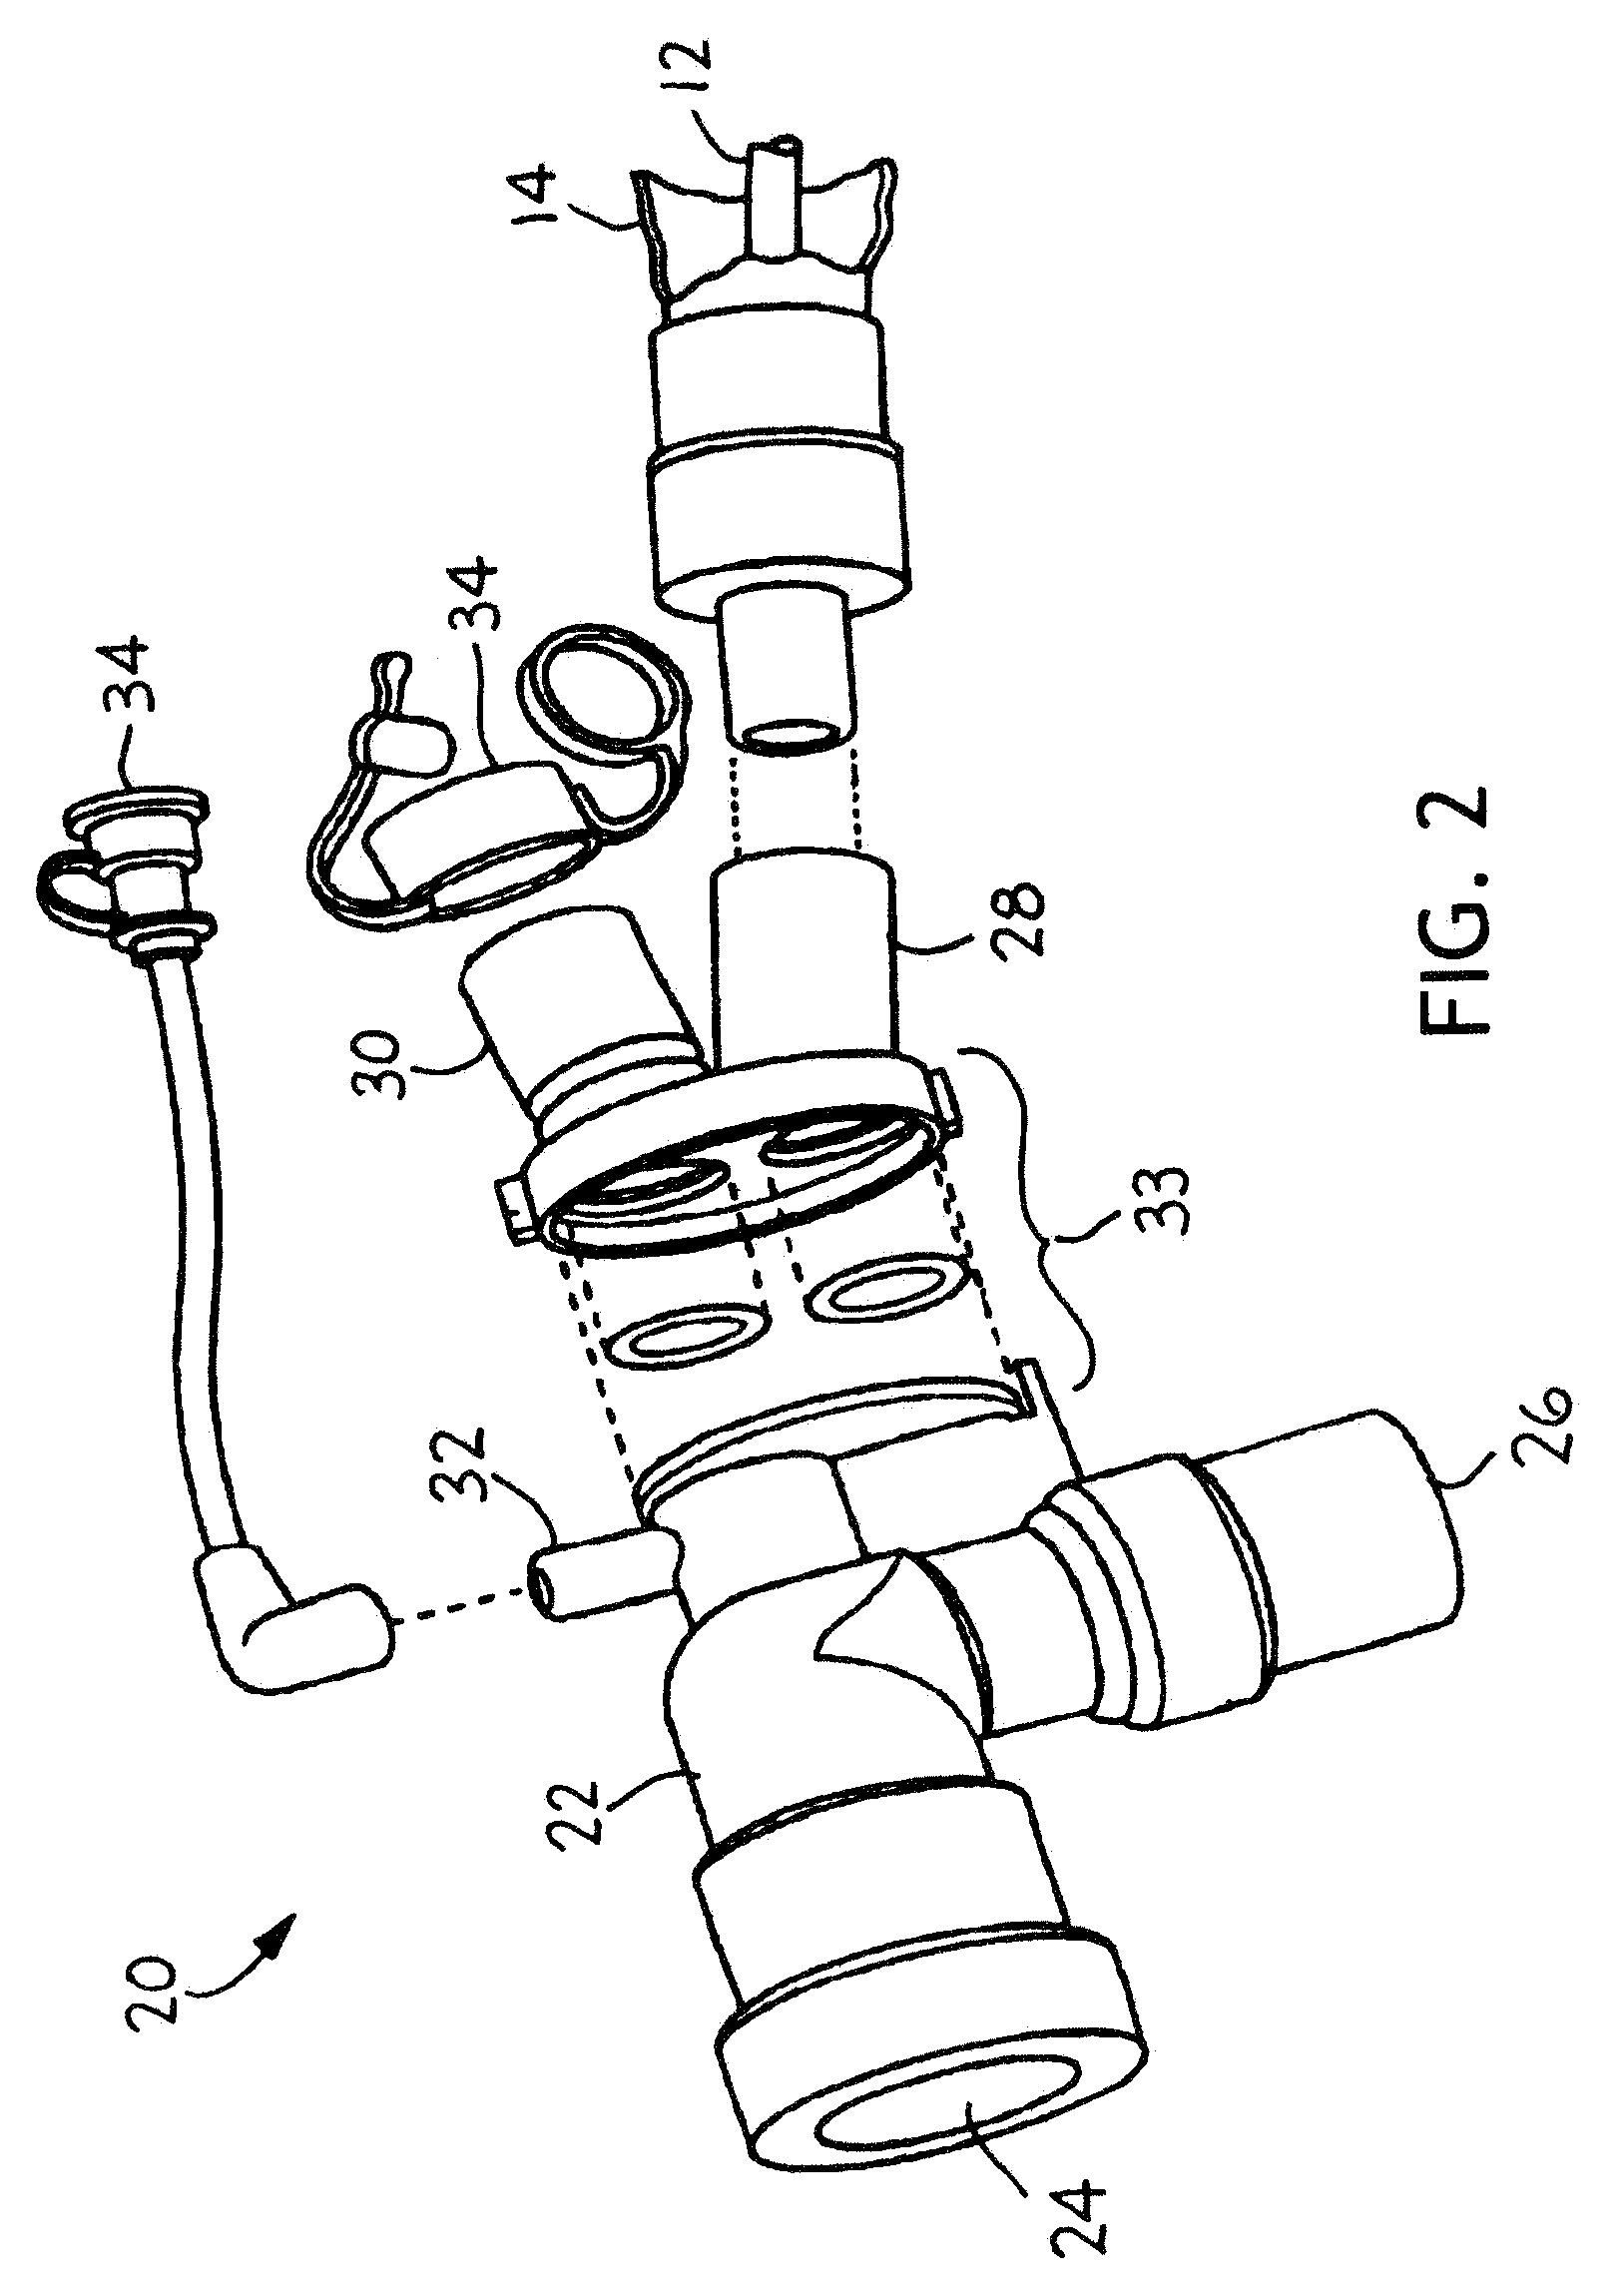 Port Sealing Cartridge for Medical Ventilating and Aspirating Devices